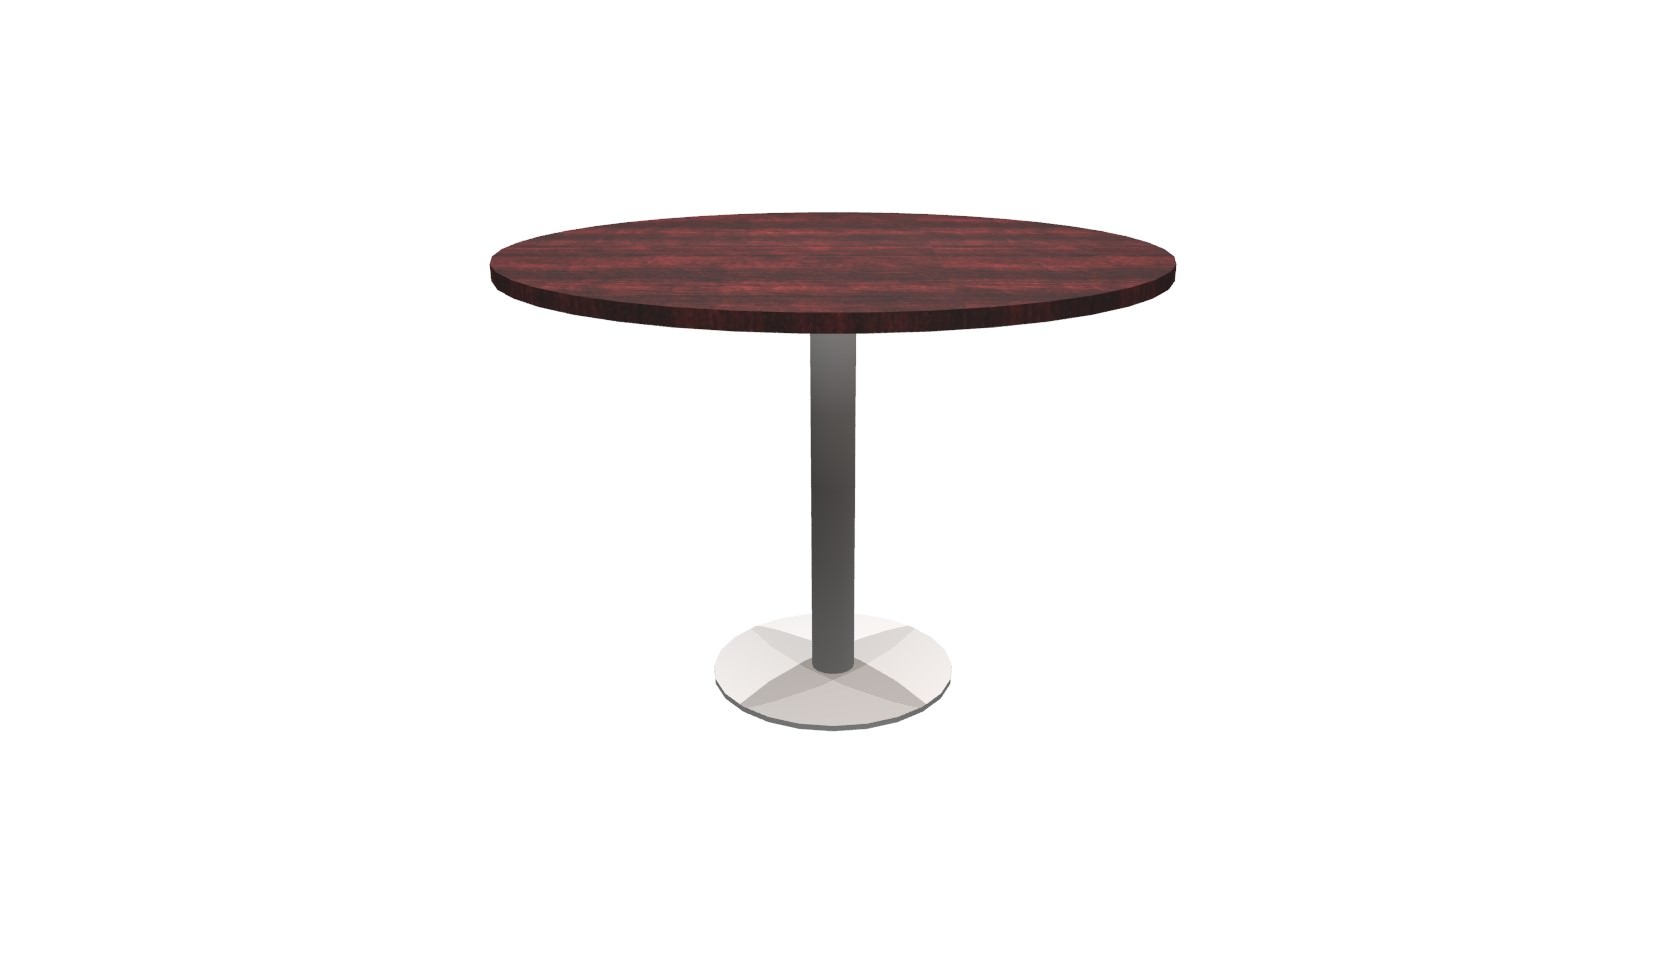 42 Inch Round Conference Table - (Mahogany / Brushed Metal)